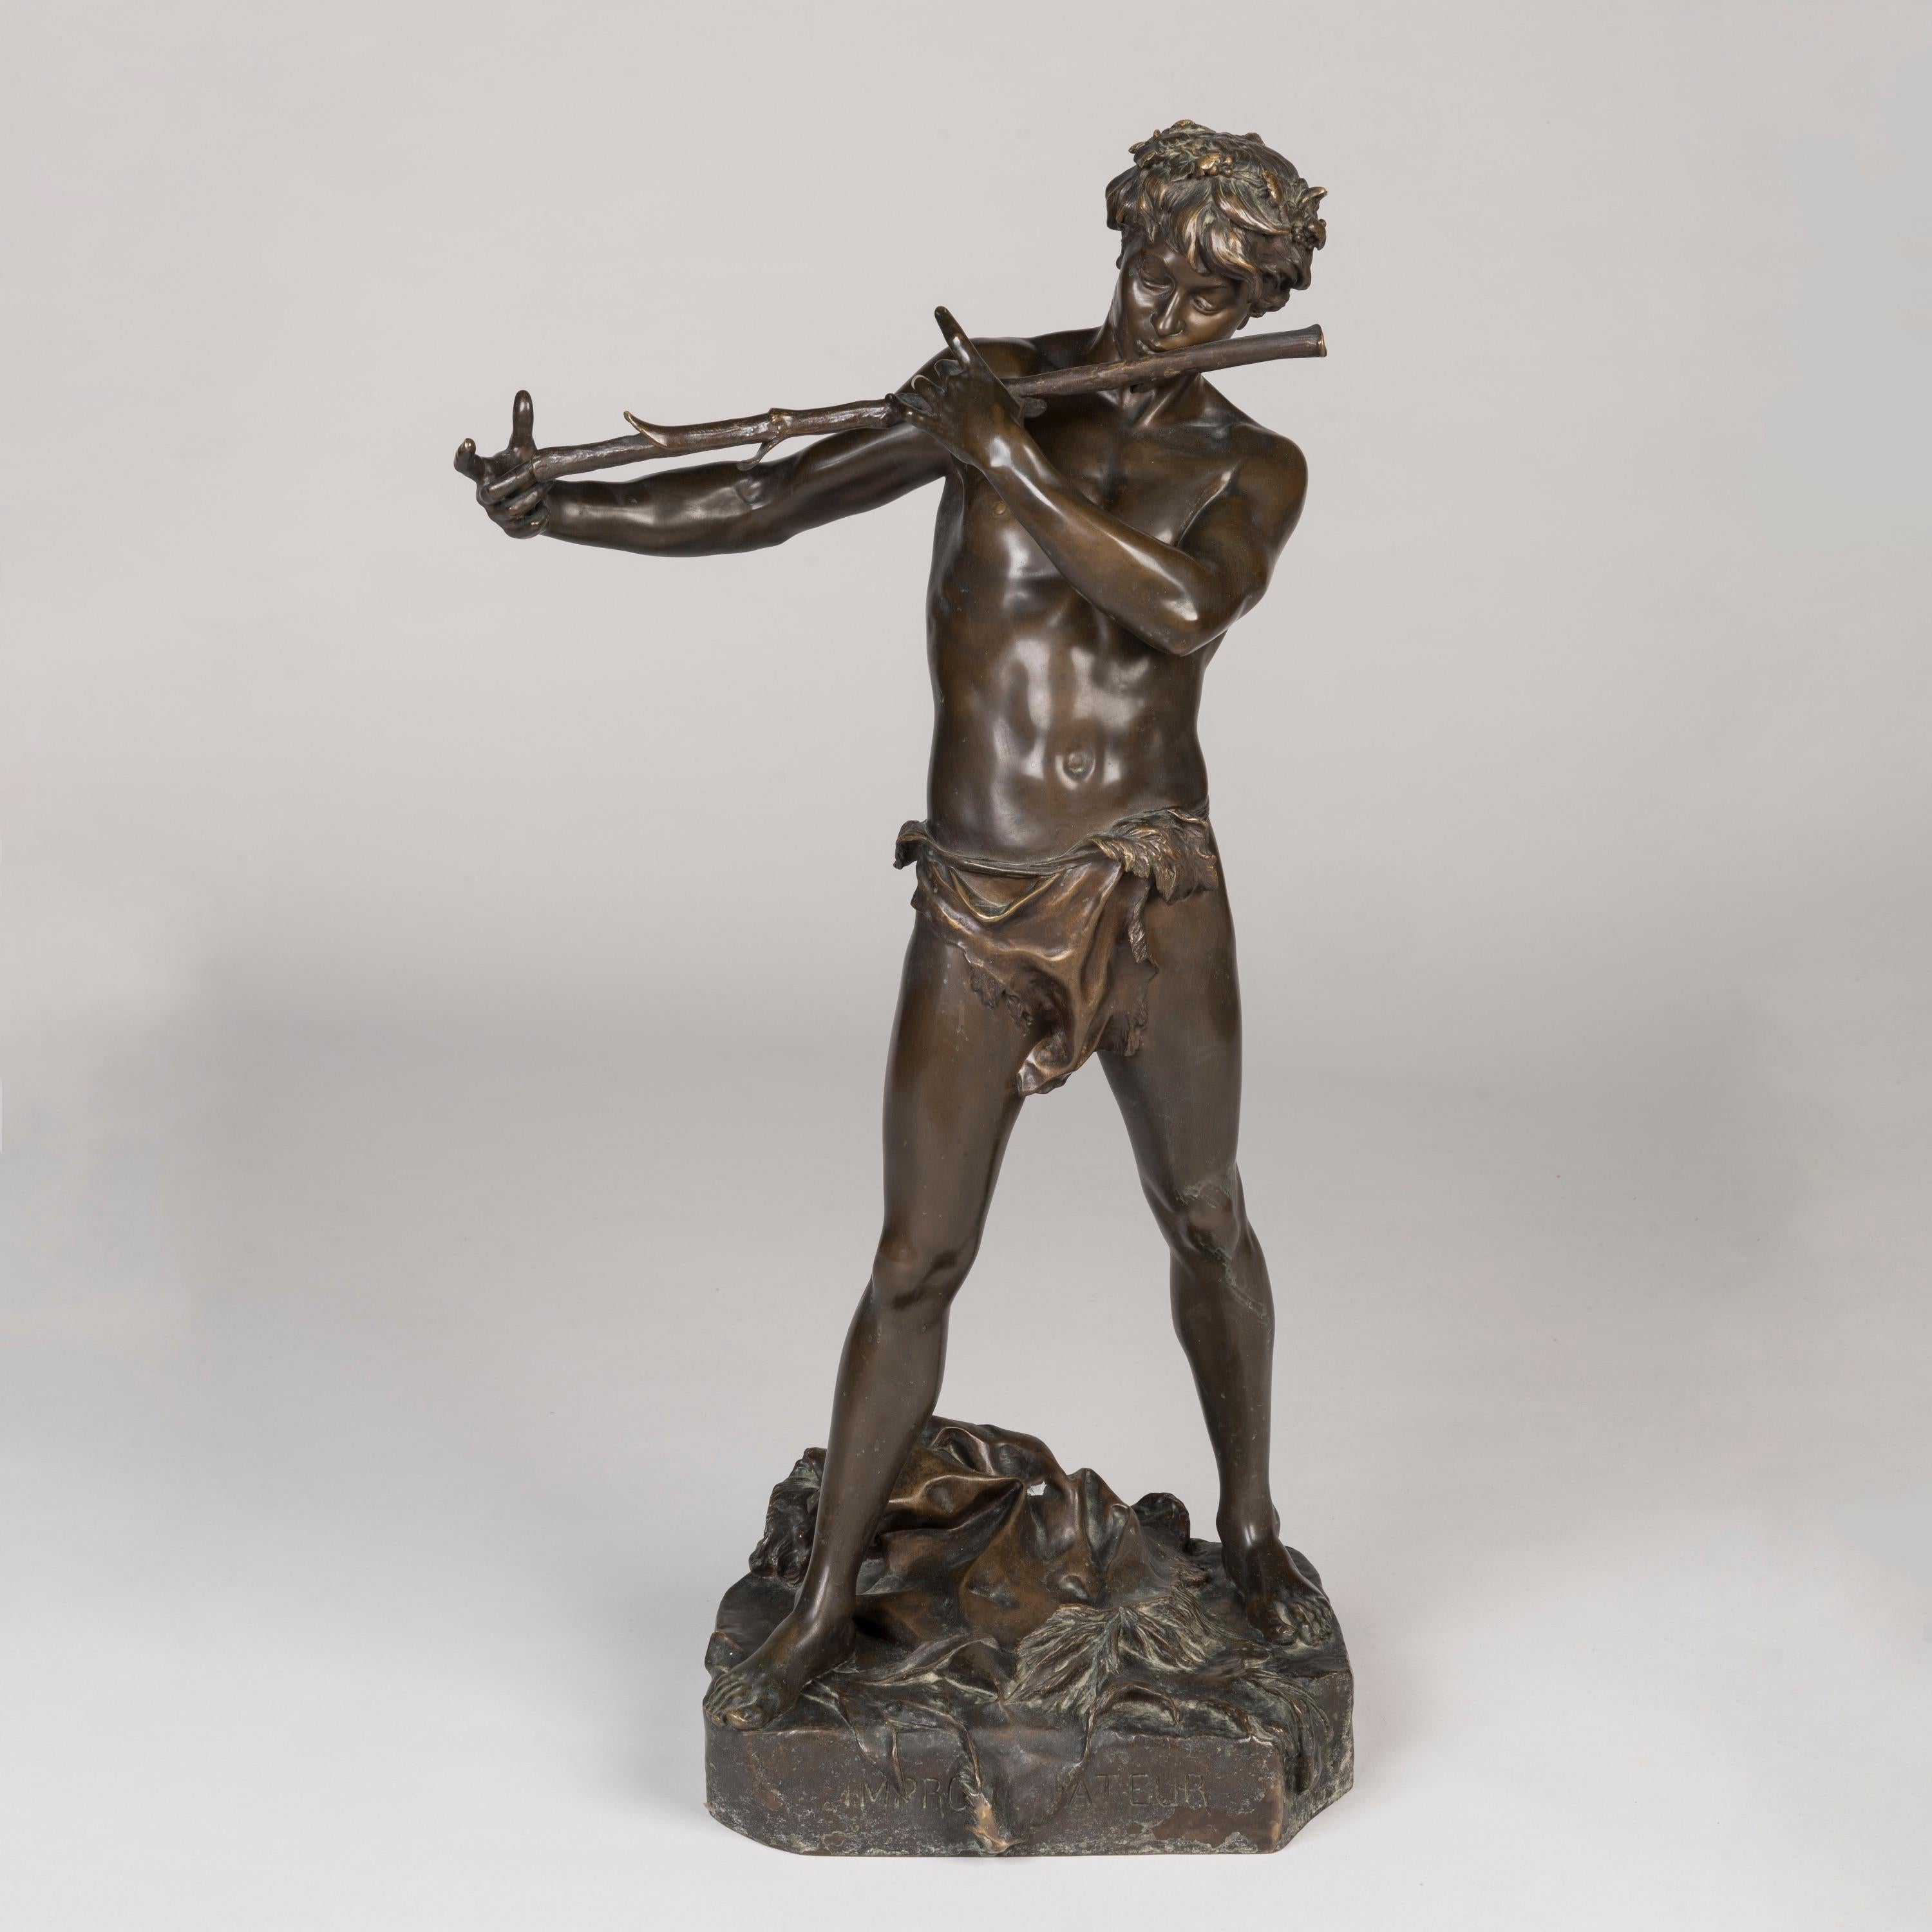 L'Improvisateur
By Félix-Maurice Charpentier (1858-1924)

Cast from bronze and with a warm patina, portraying a youth playing the flute fashioned from a branch. Titled on the base, bearing a dedicatory inscription, and signed 